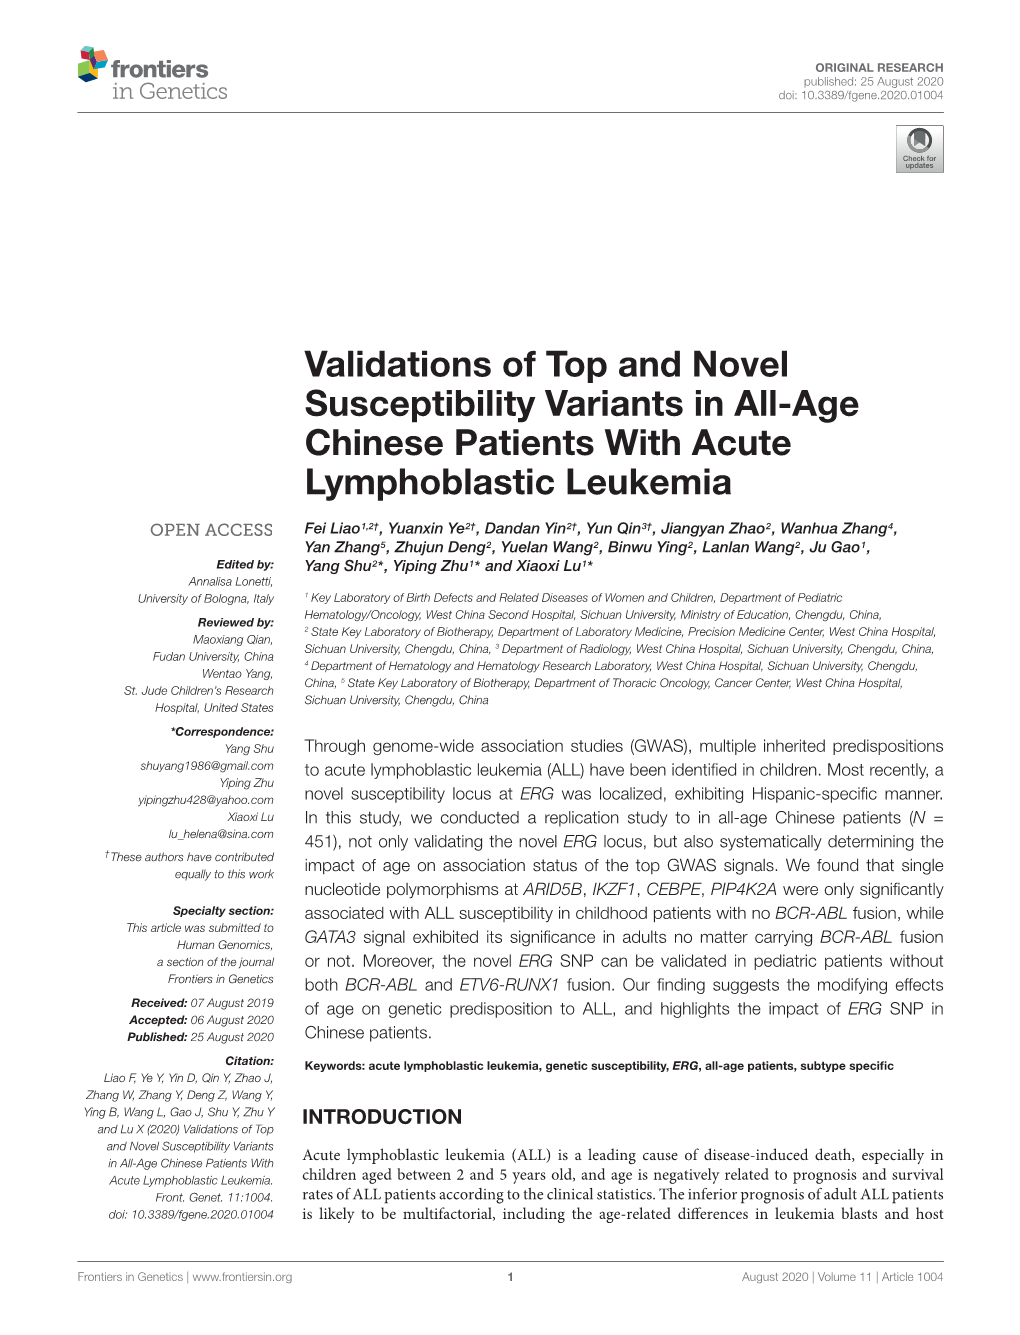 Validations of Top and Novel Susceptibility Variants in All-Age Chinese Patients with Acute Lymphoblastic Leukemia